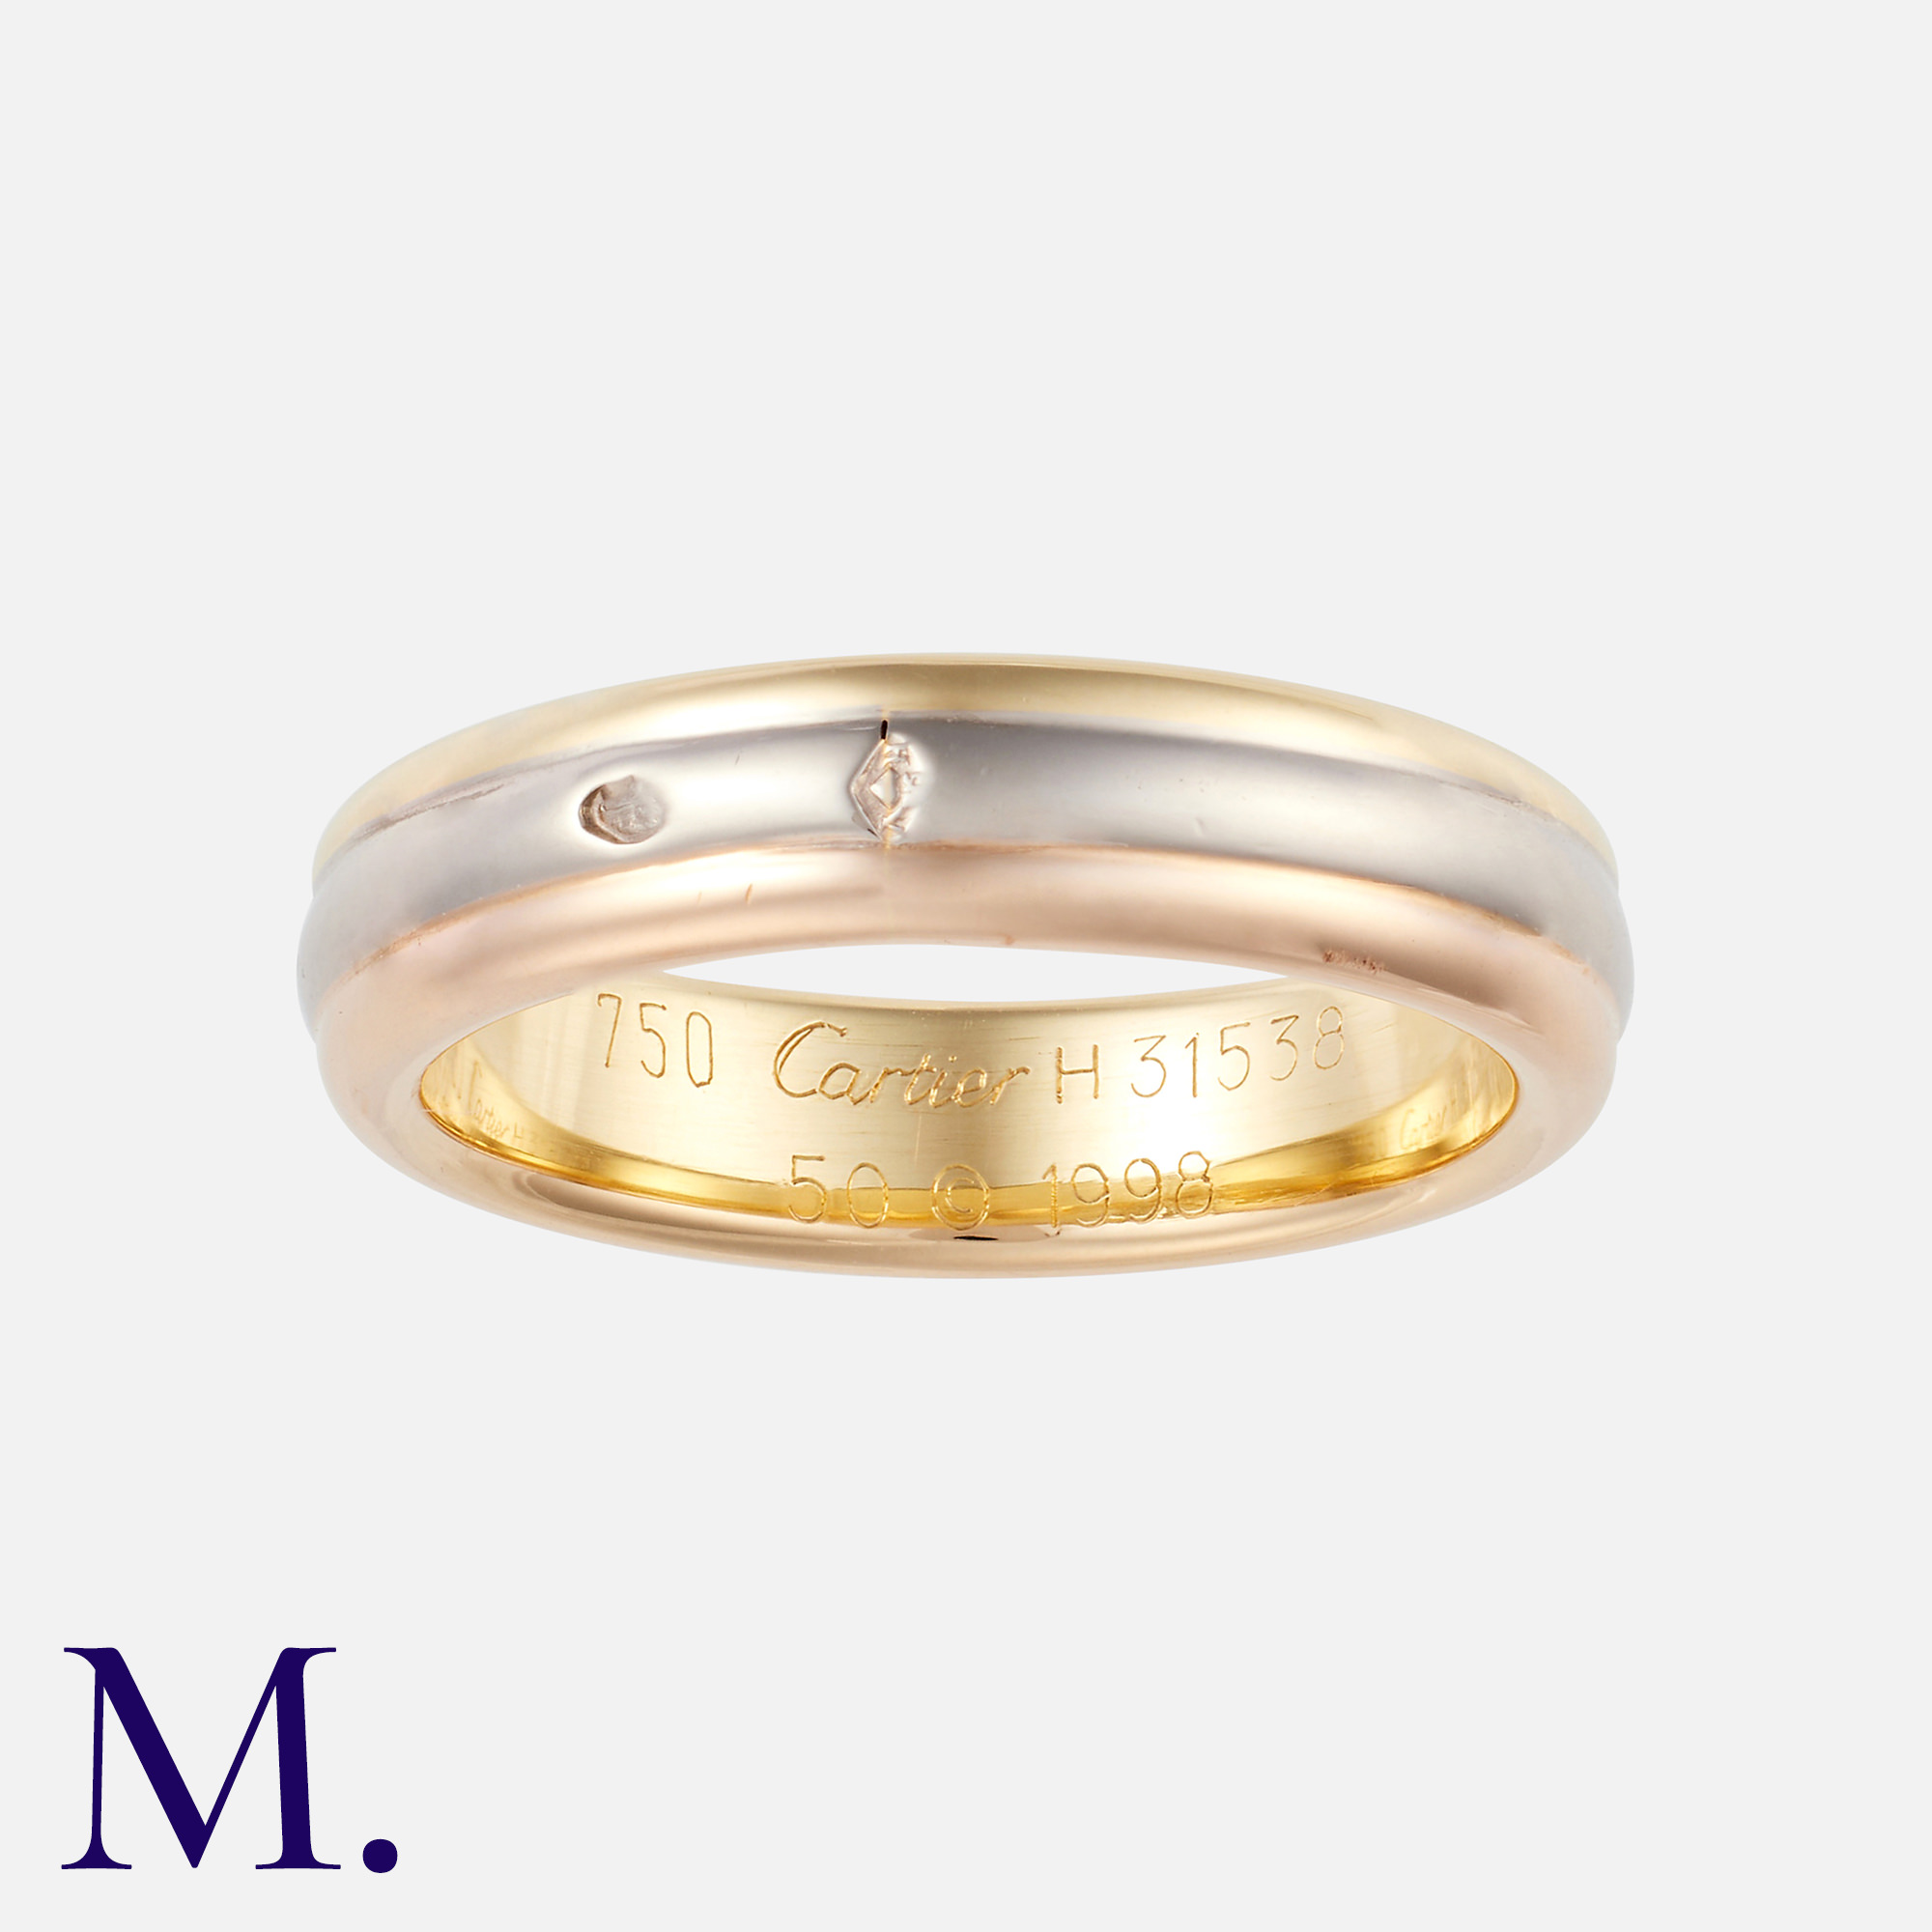 CARTIER. A Vendome Ring in 18K rose, white and yellow gold. Signed Cartier and marked for 18ct gold. - Image 2 of 2